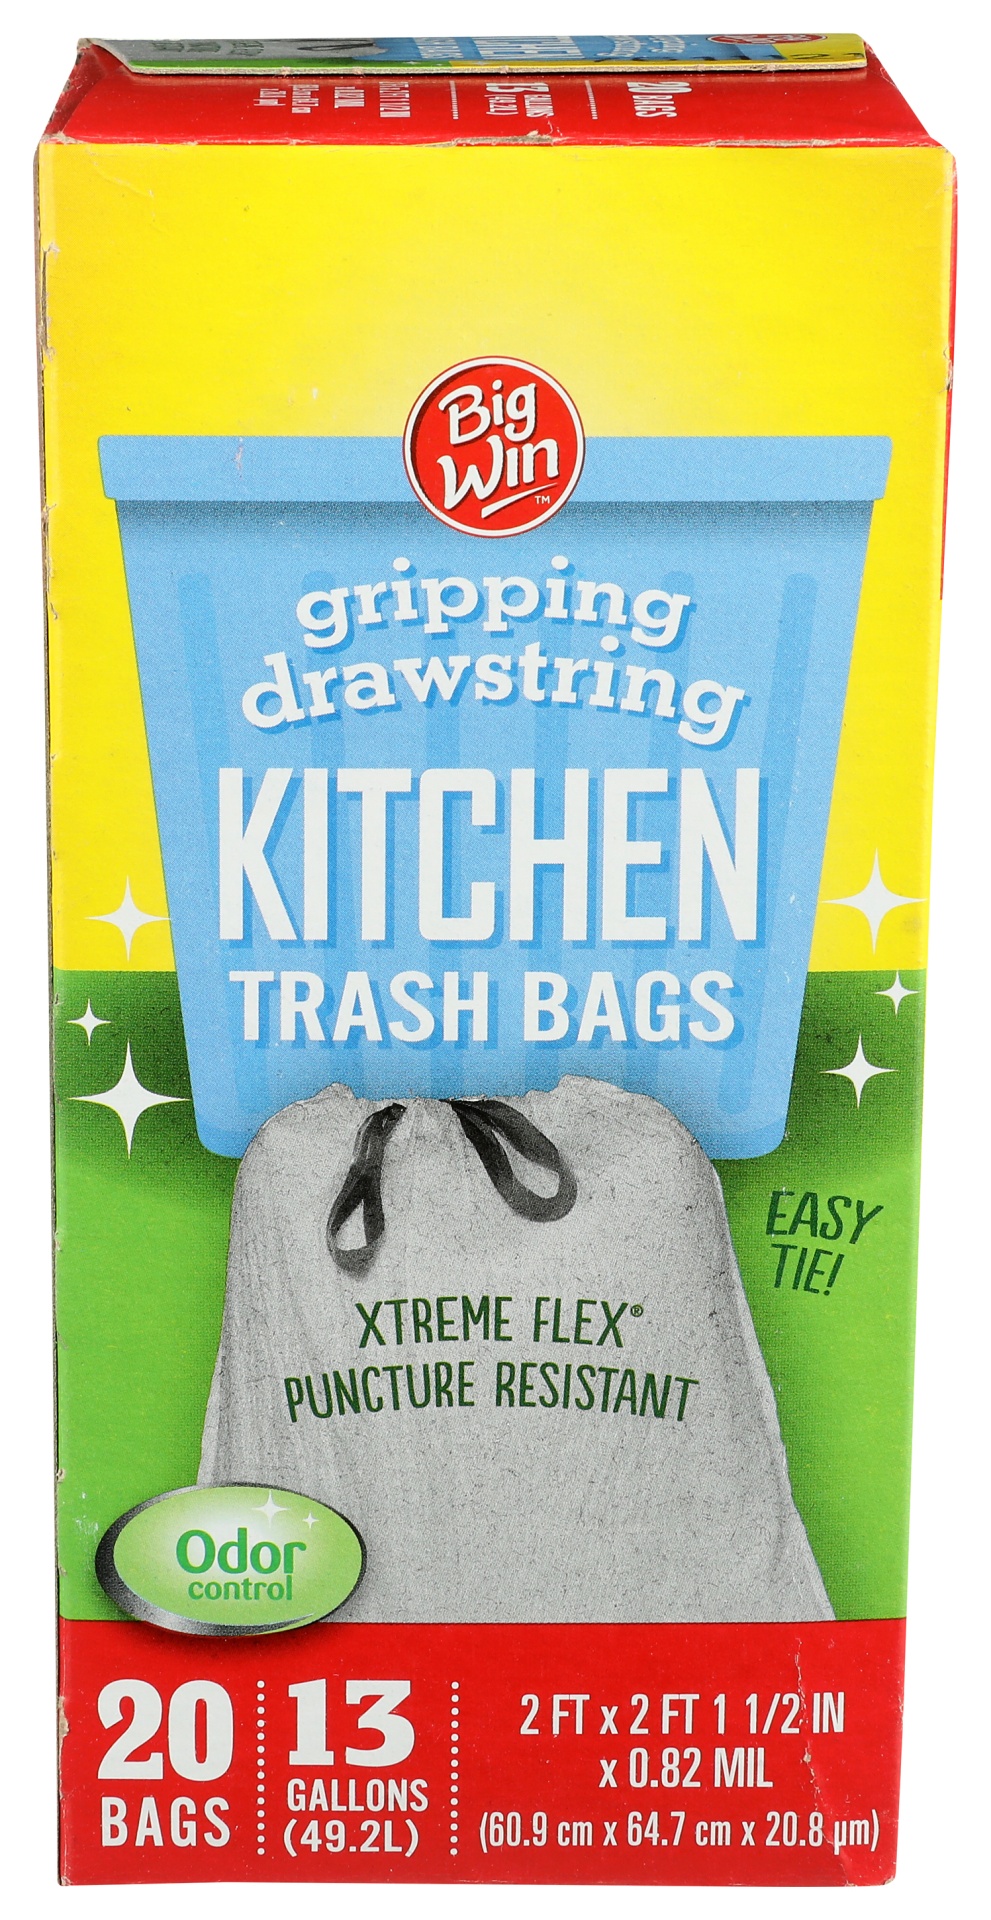 slide 1 of 1, Big Win Gripping Drawstring Kitchen Trash Bags with Odor Control, 13 Gallon, 20 ct